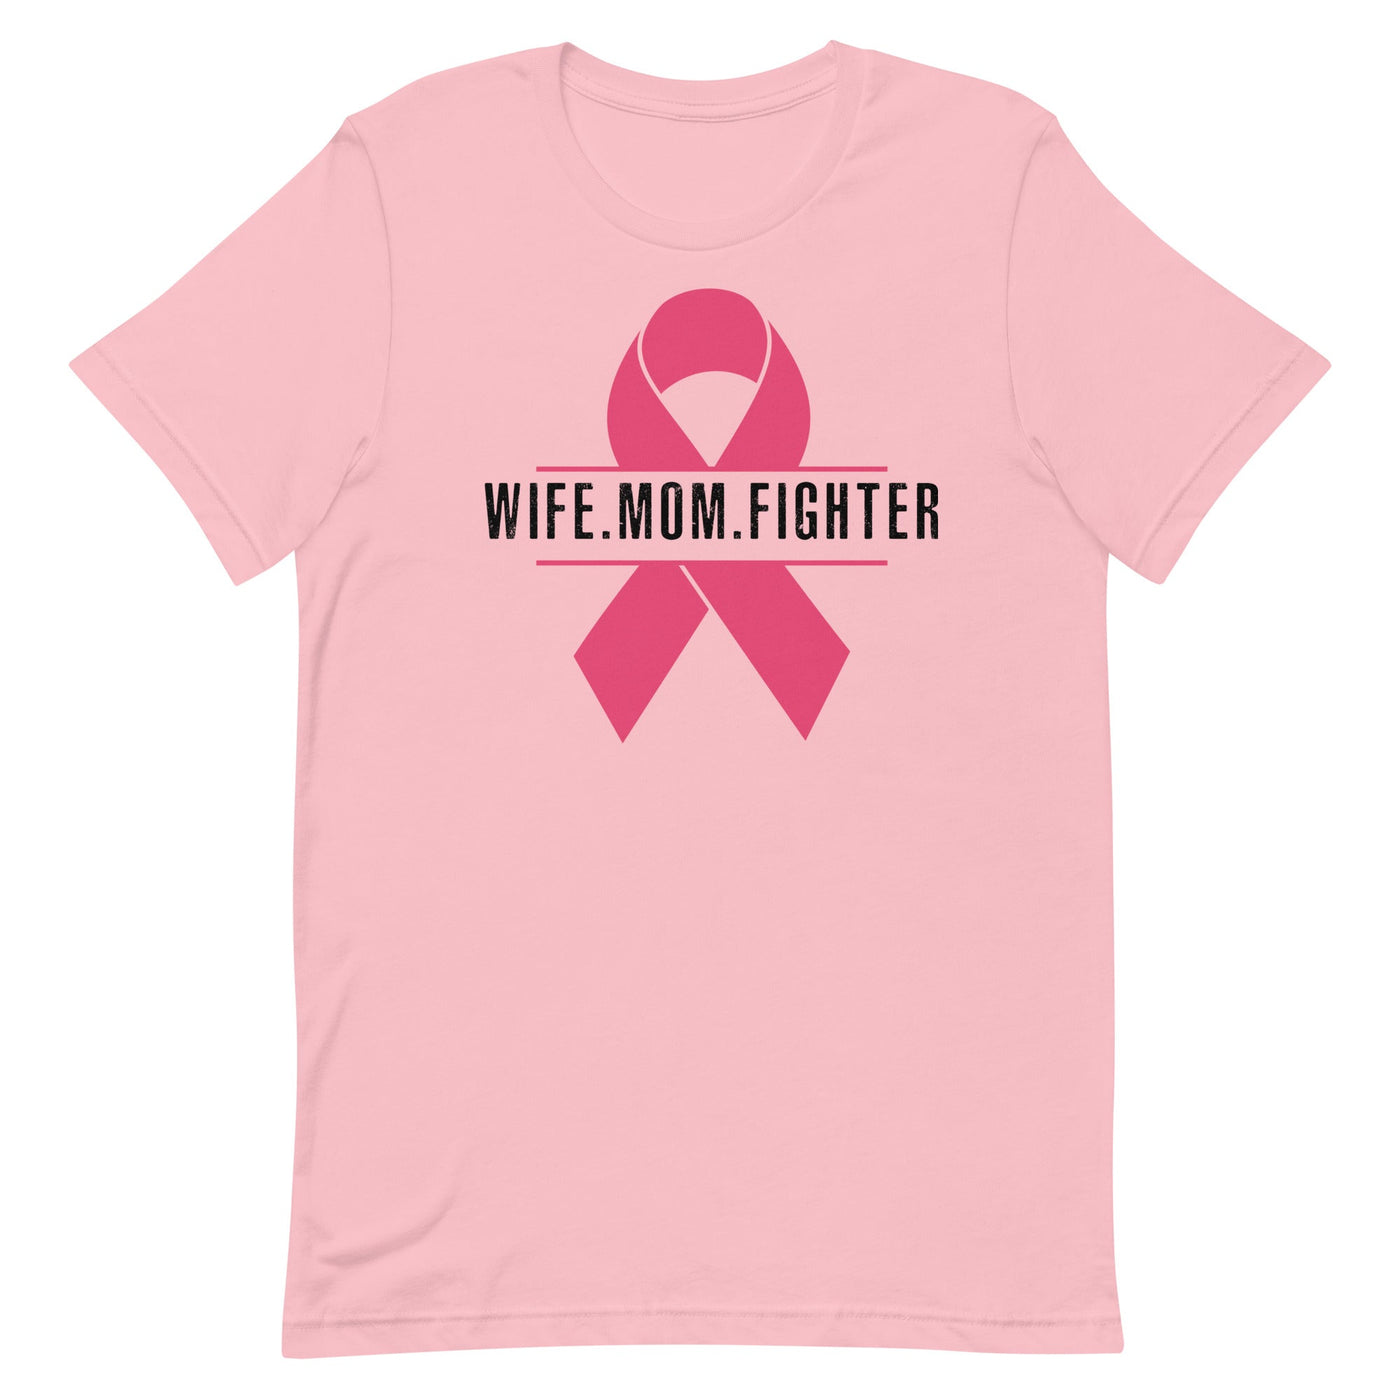 WIFE. MOM. FIGHTER - WOMEN'S T-SHIRT- BLACK FONT Pink S 